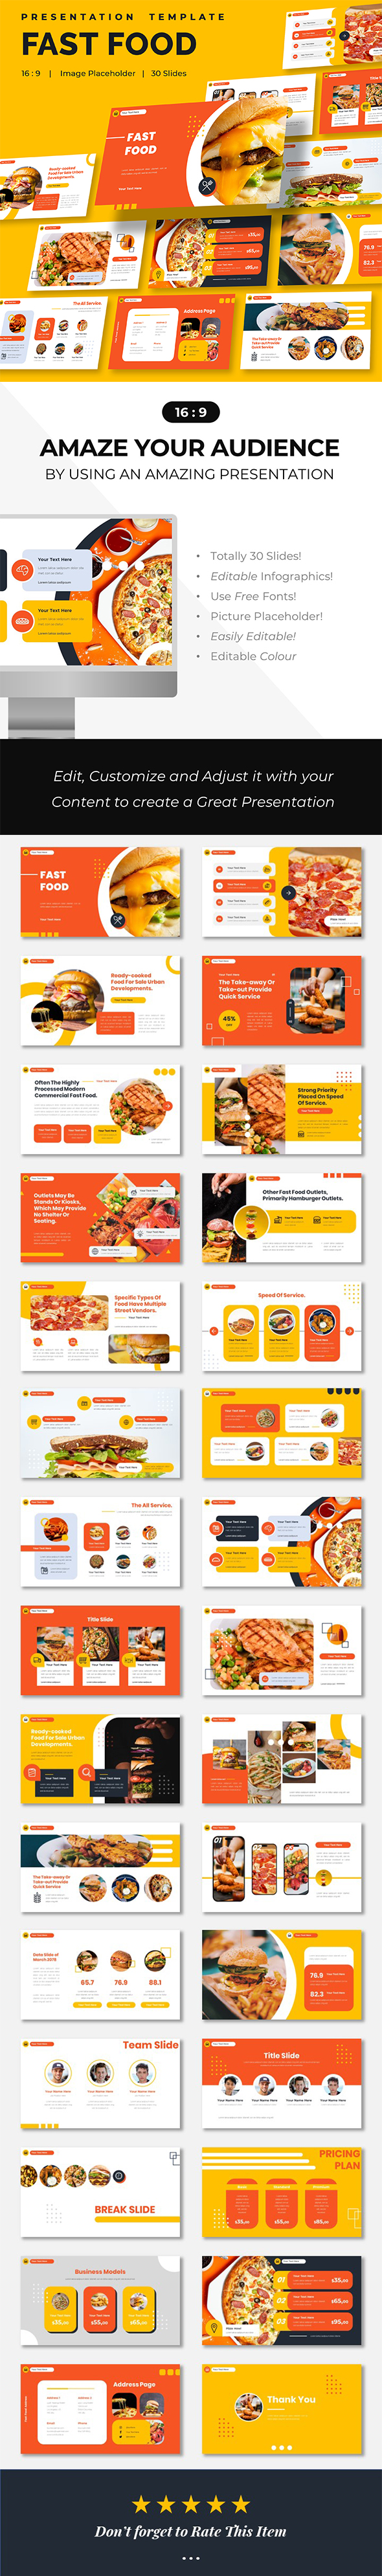 [DOWNLOAD]Fast Food - Service Culinary Business Presentation Google Slides Template